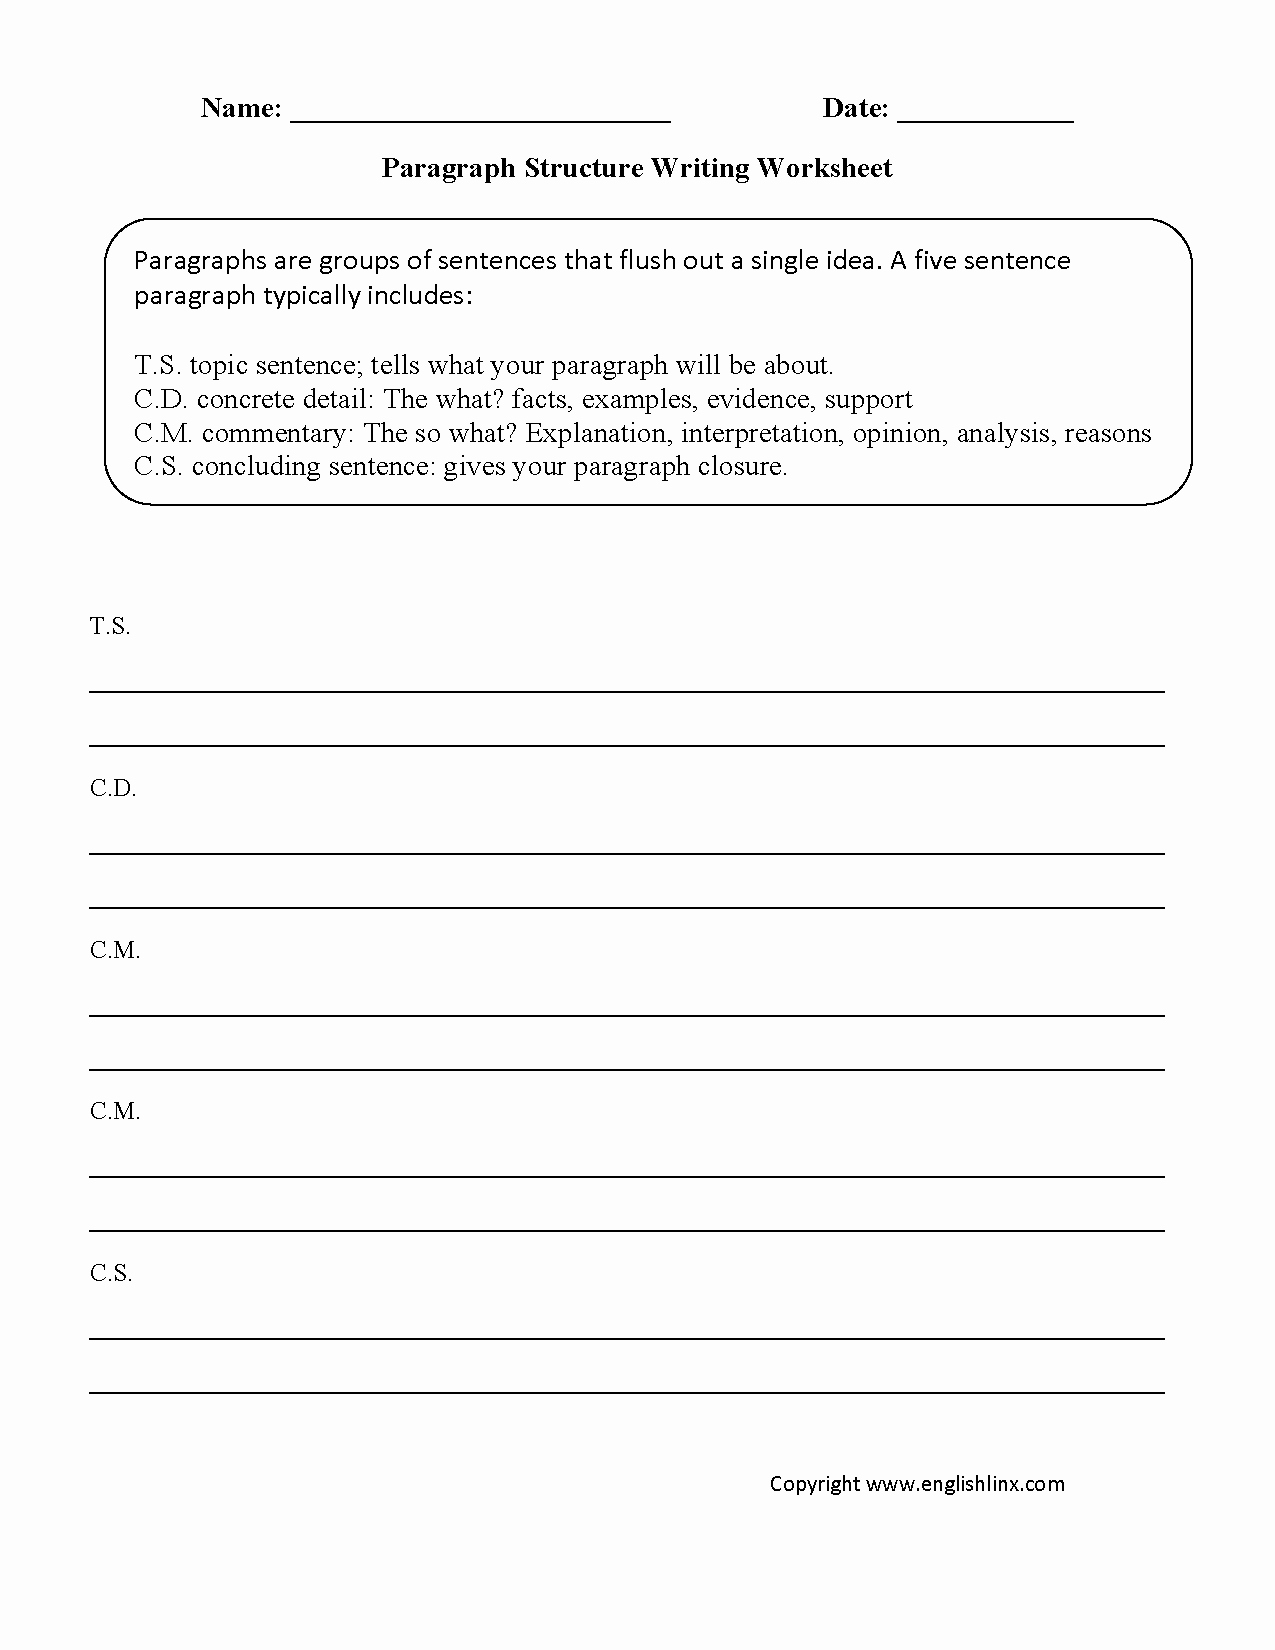 Writing A Paragraph Worksheet Awesome Paragraph Writing Worksheets